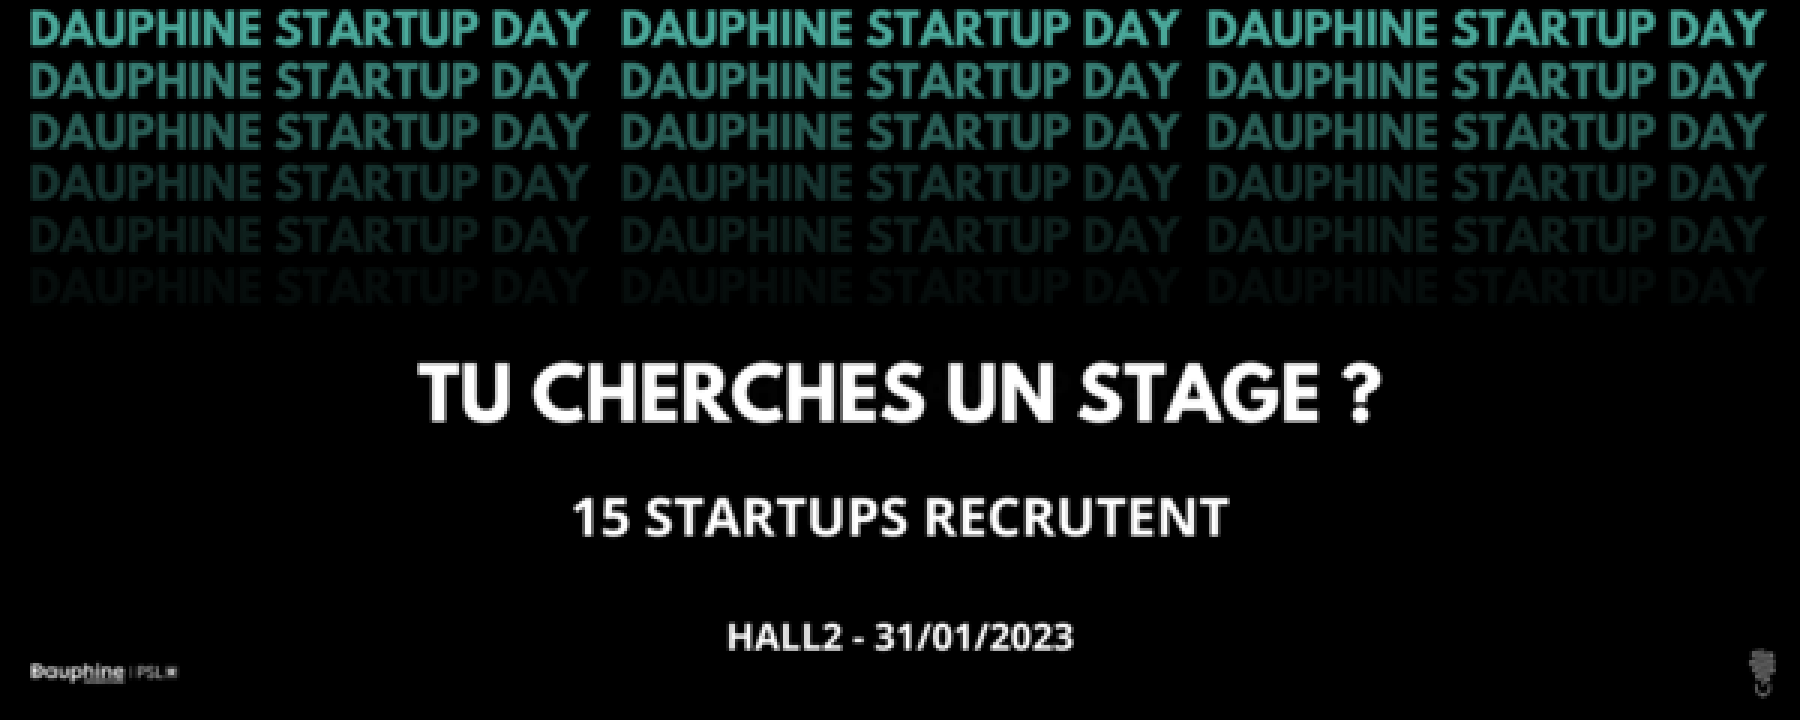 Dauphine Startup Day 7e édition